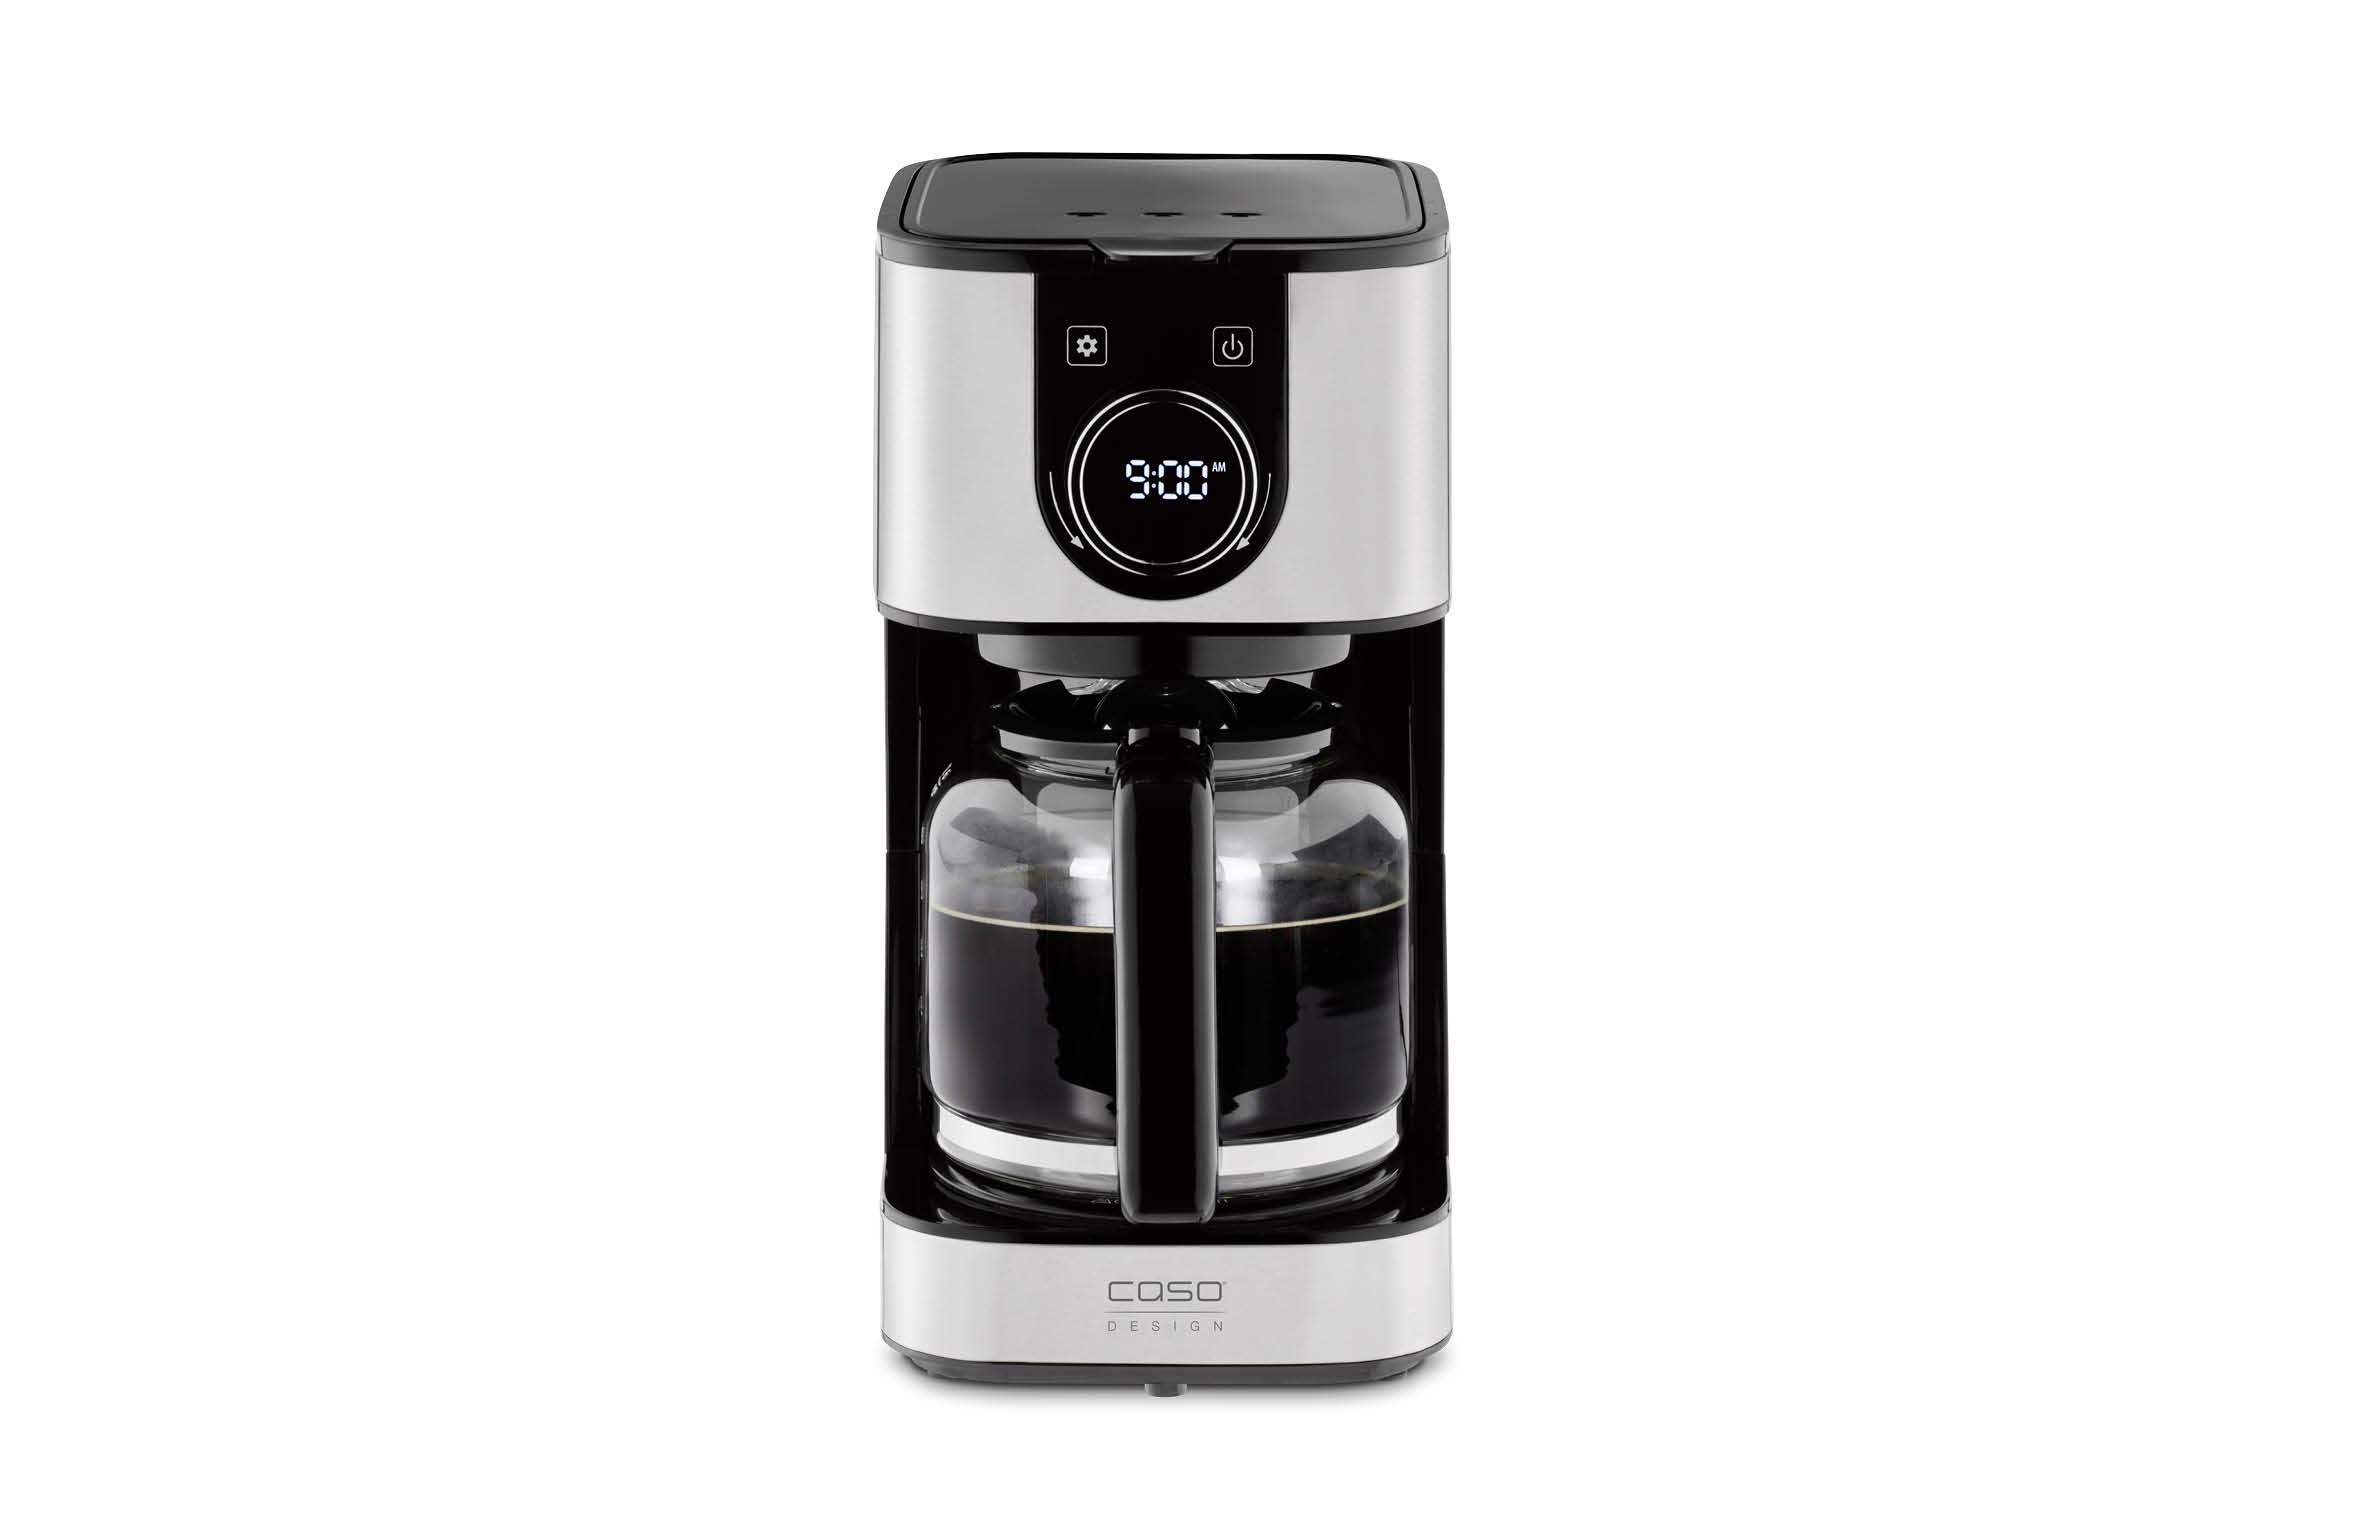 Caso Gourmet Gold Cup Coffee Maker - Black